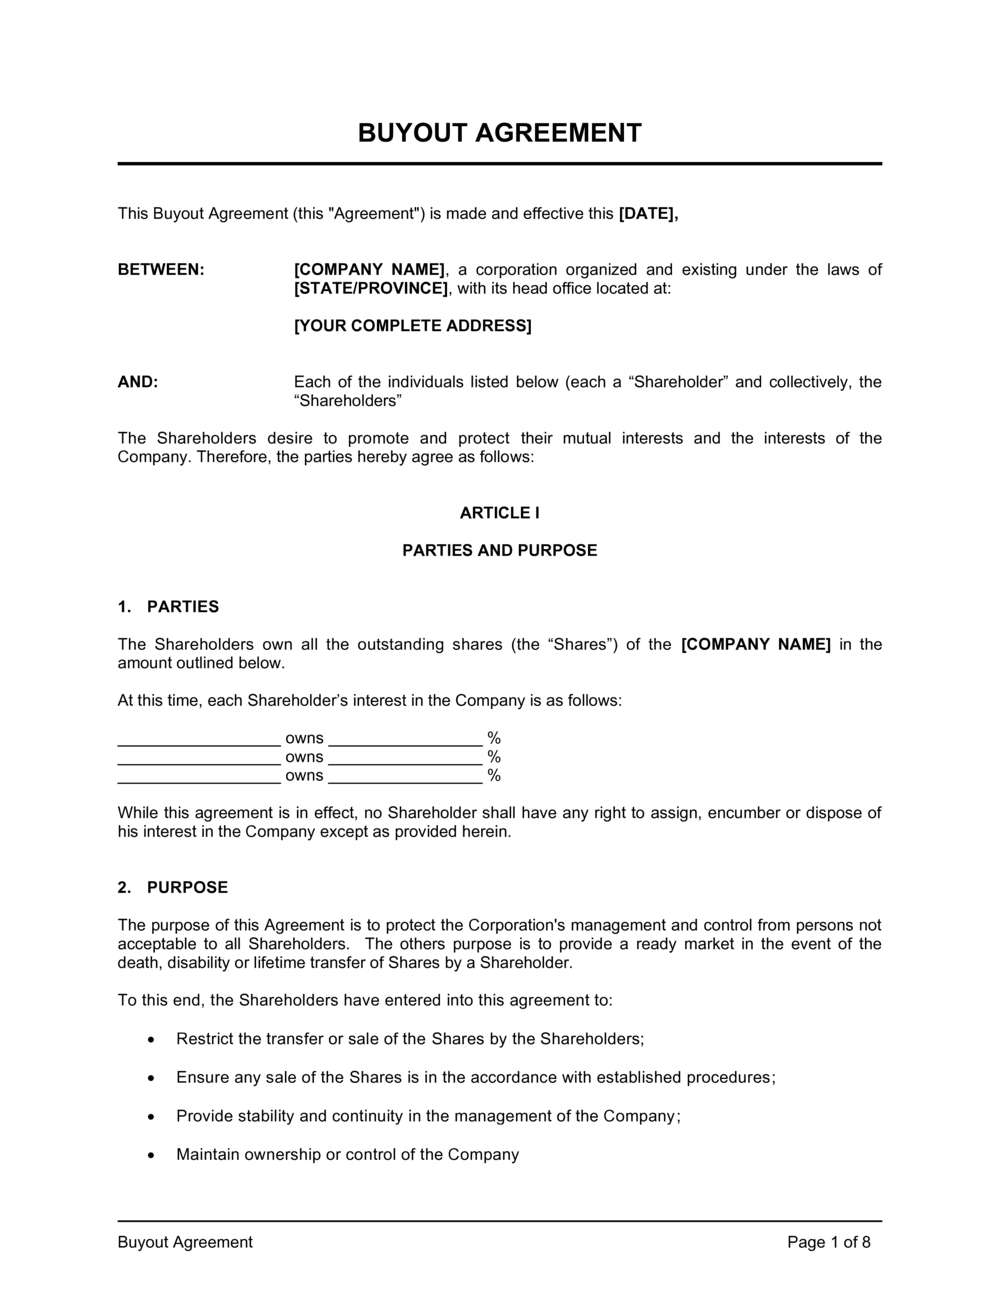 Buyout Agreement Template By Business In A Box